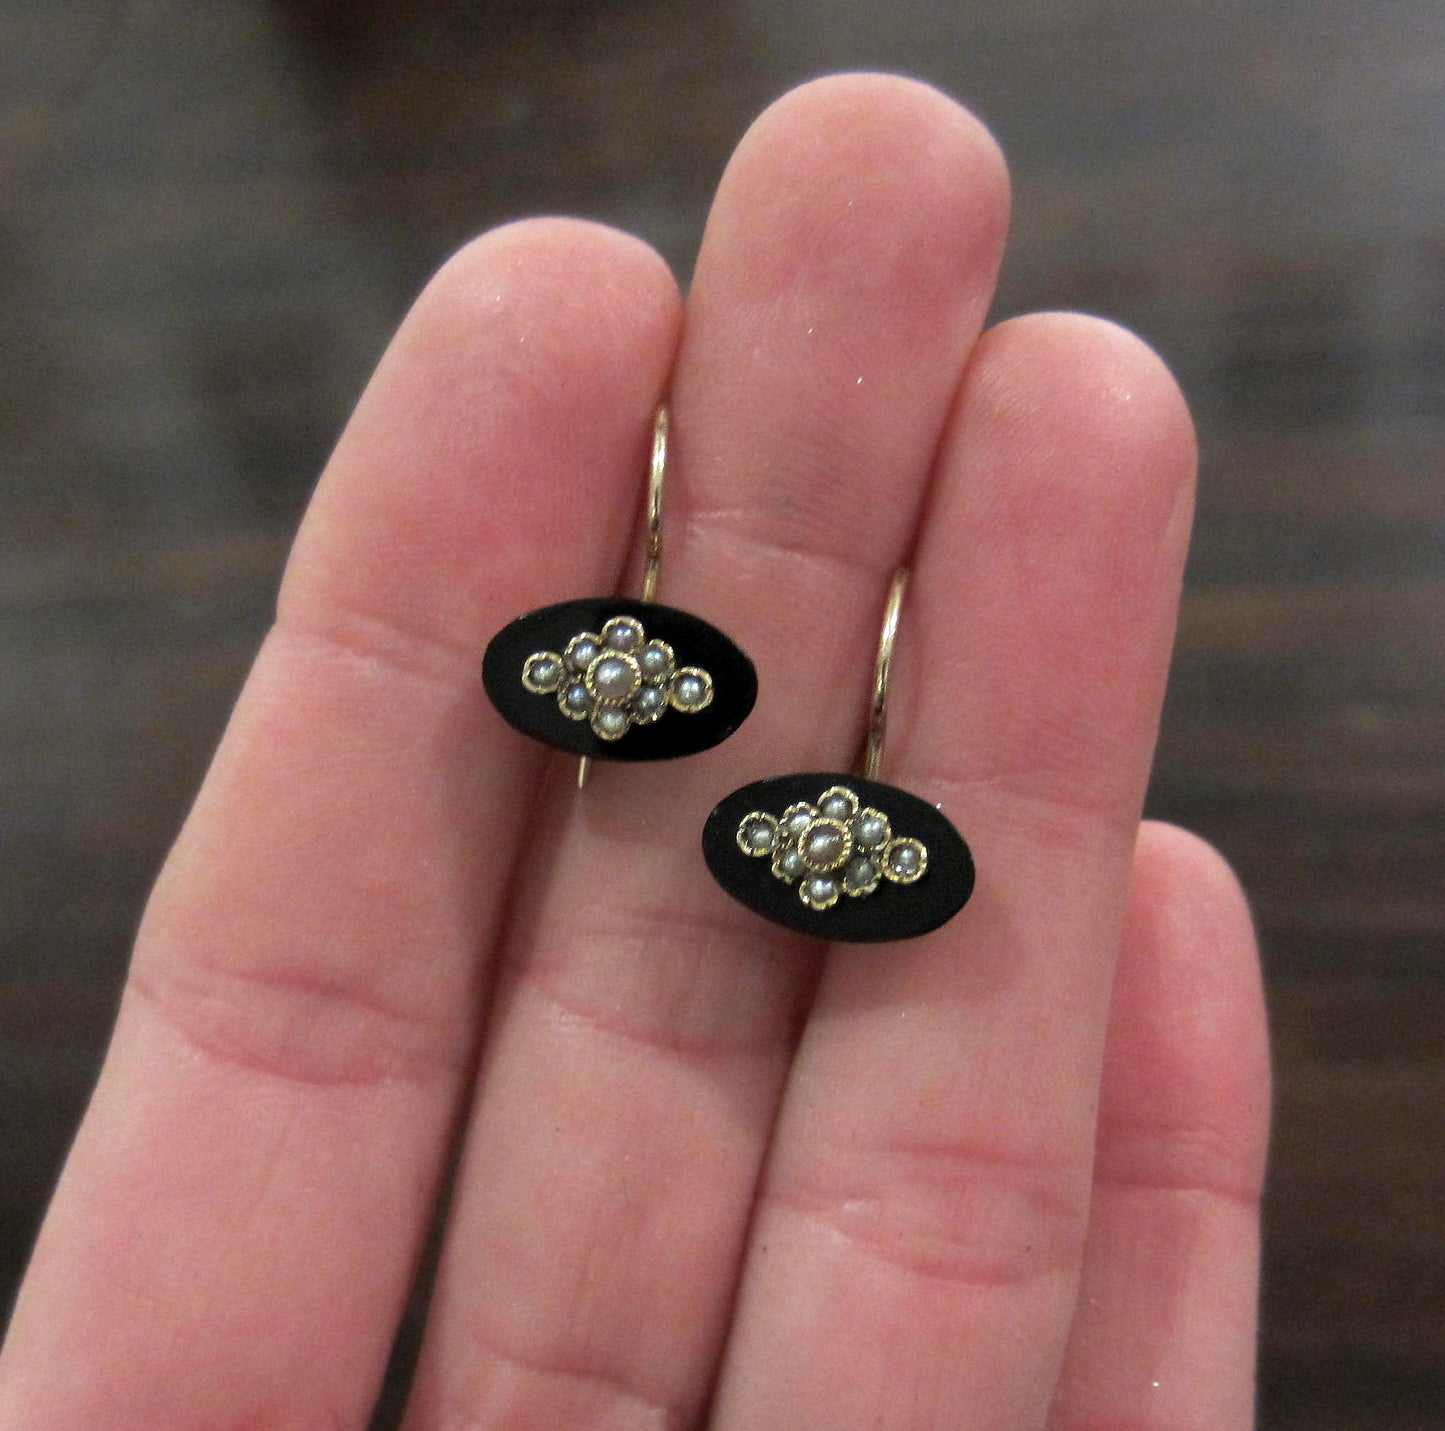 SOLD--Tiny Victorian Pearl and Onyx Earrings 14k c. 1880